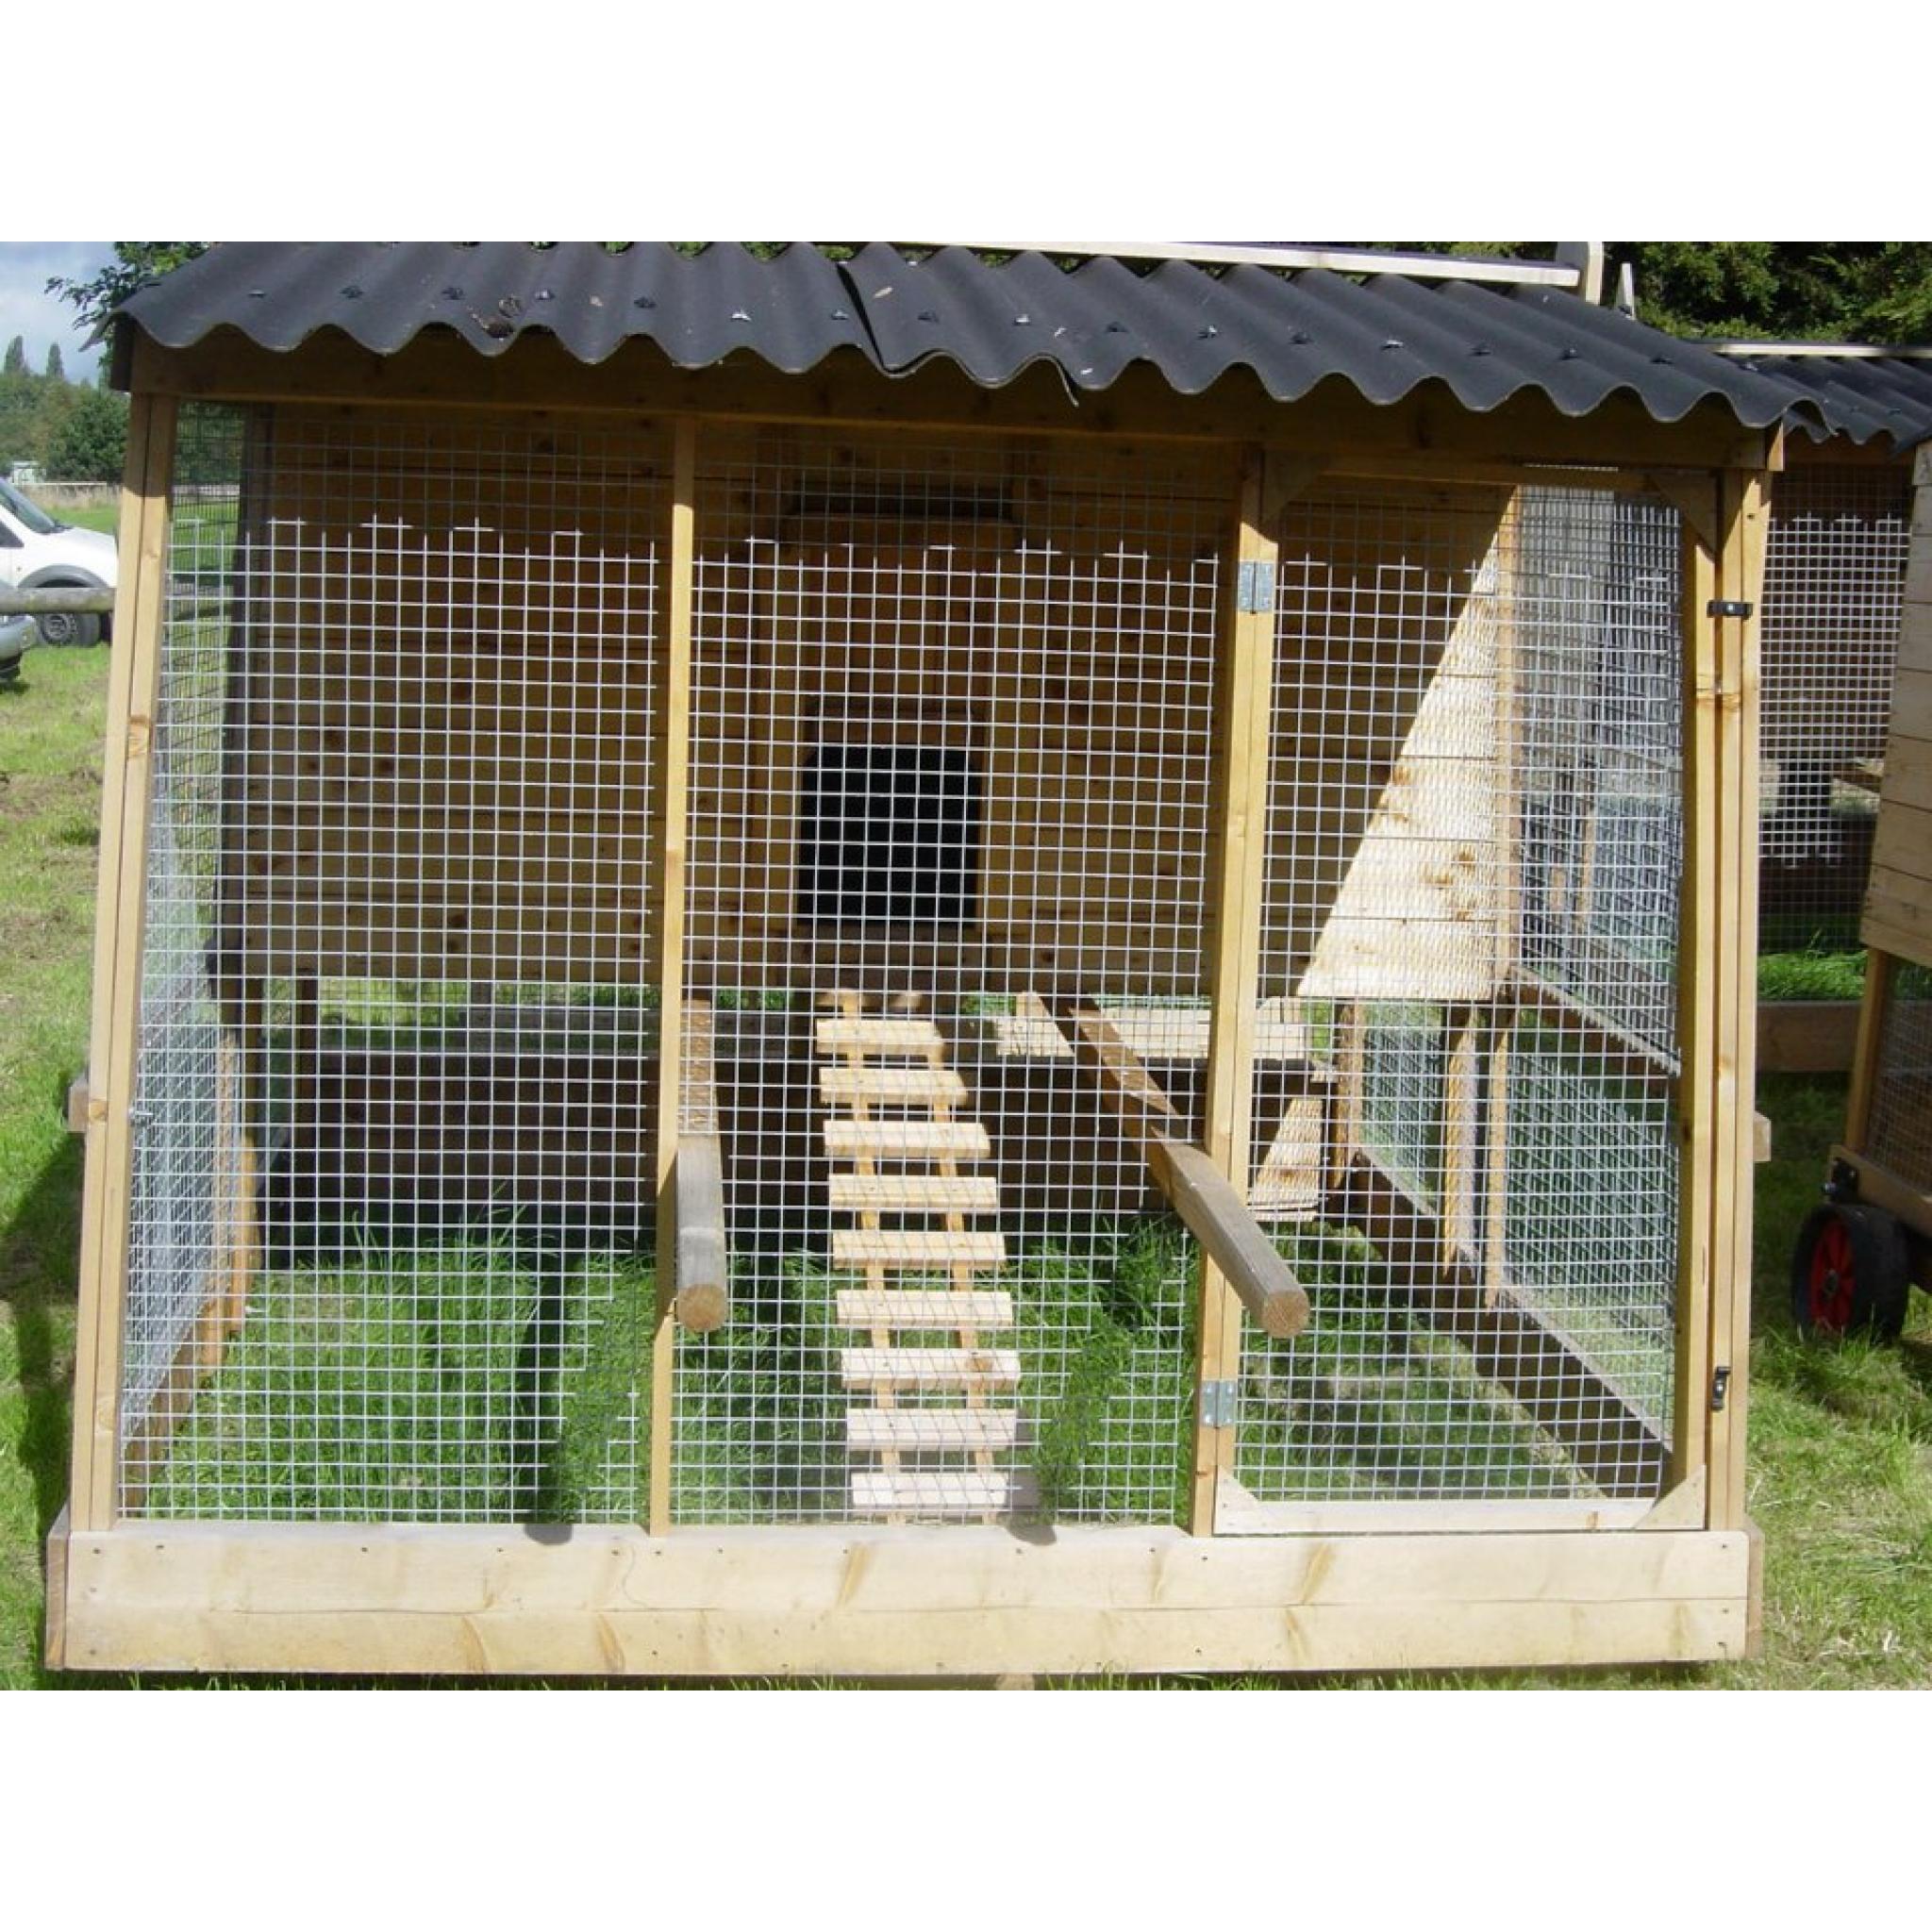 Penthouse Chicken House | Domestic Fowl Trust